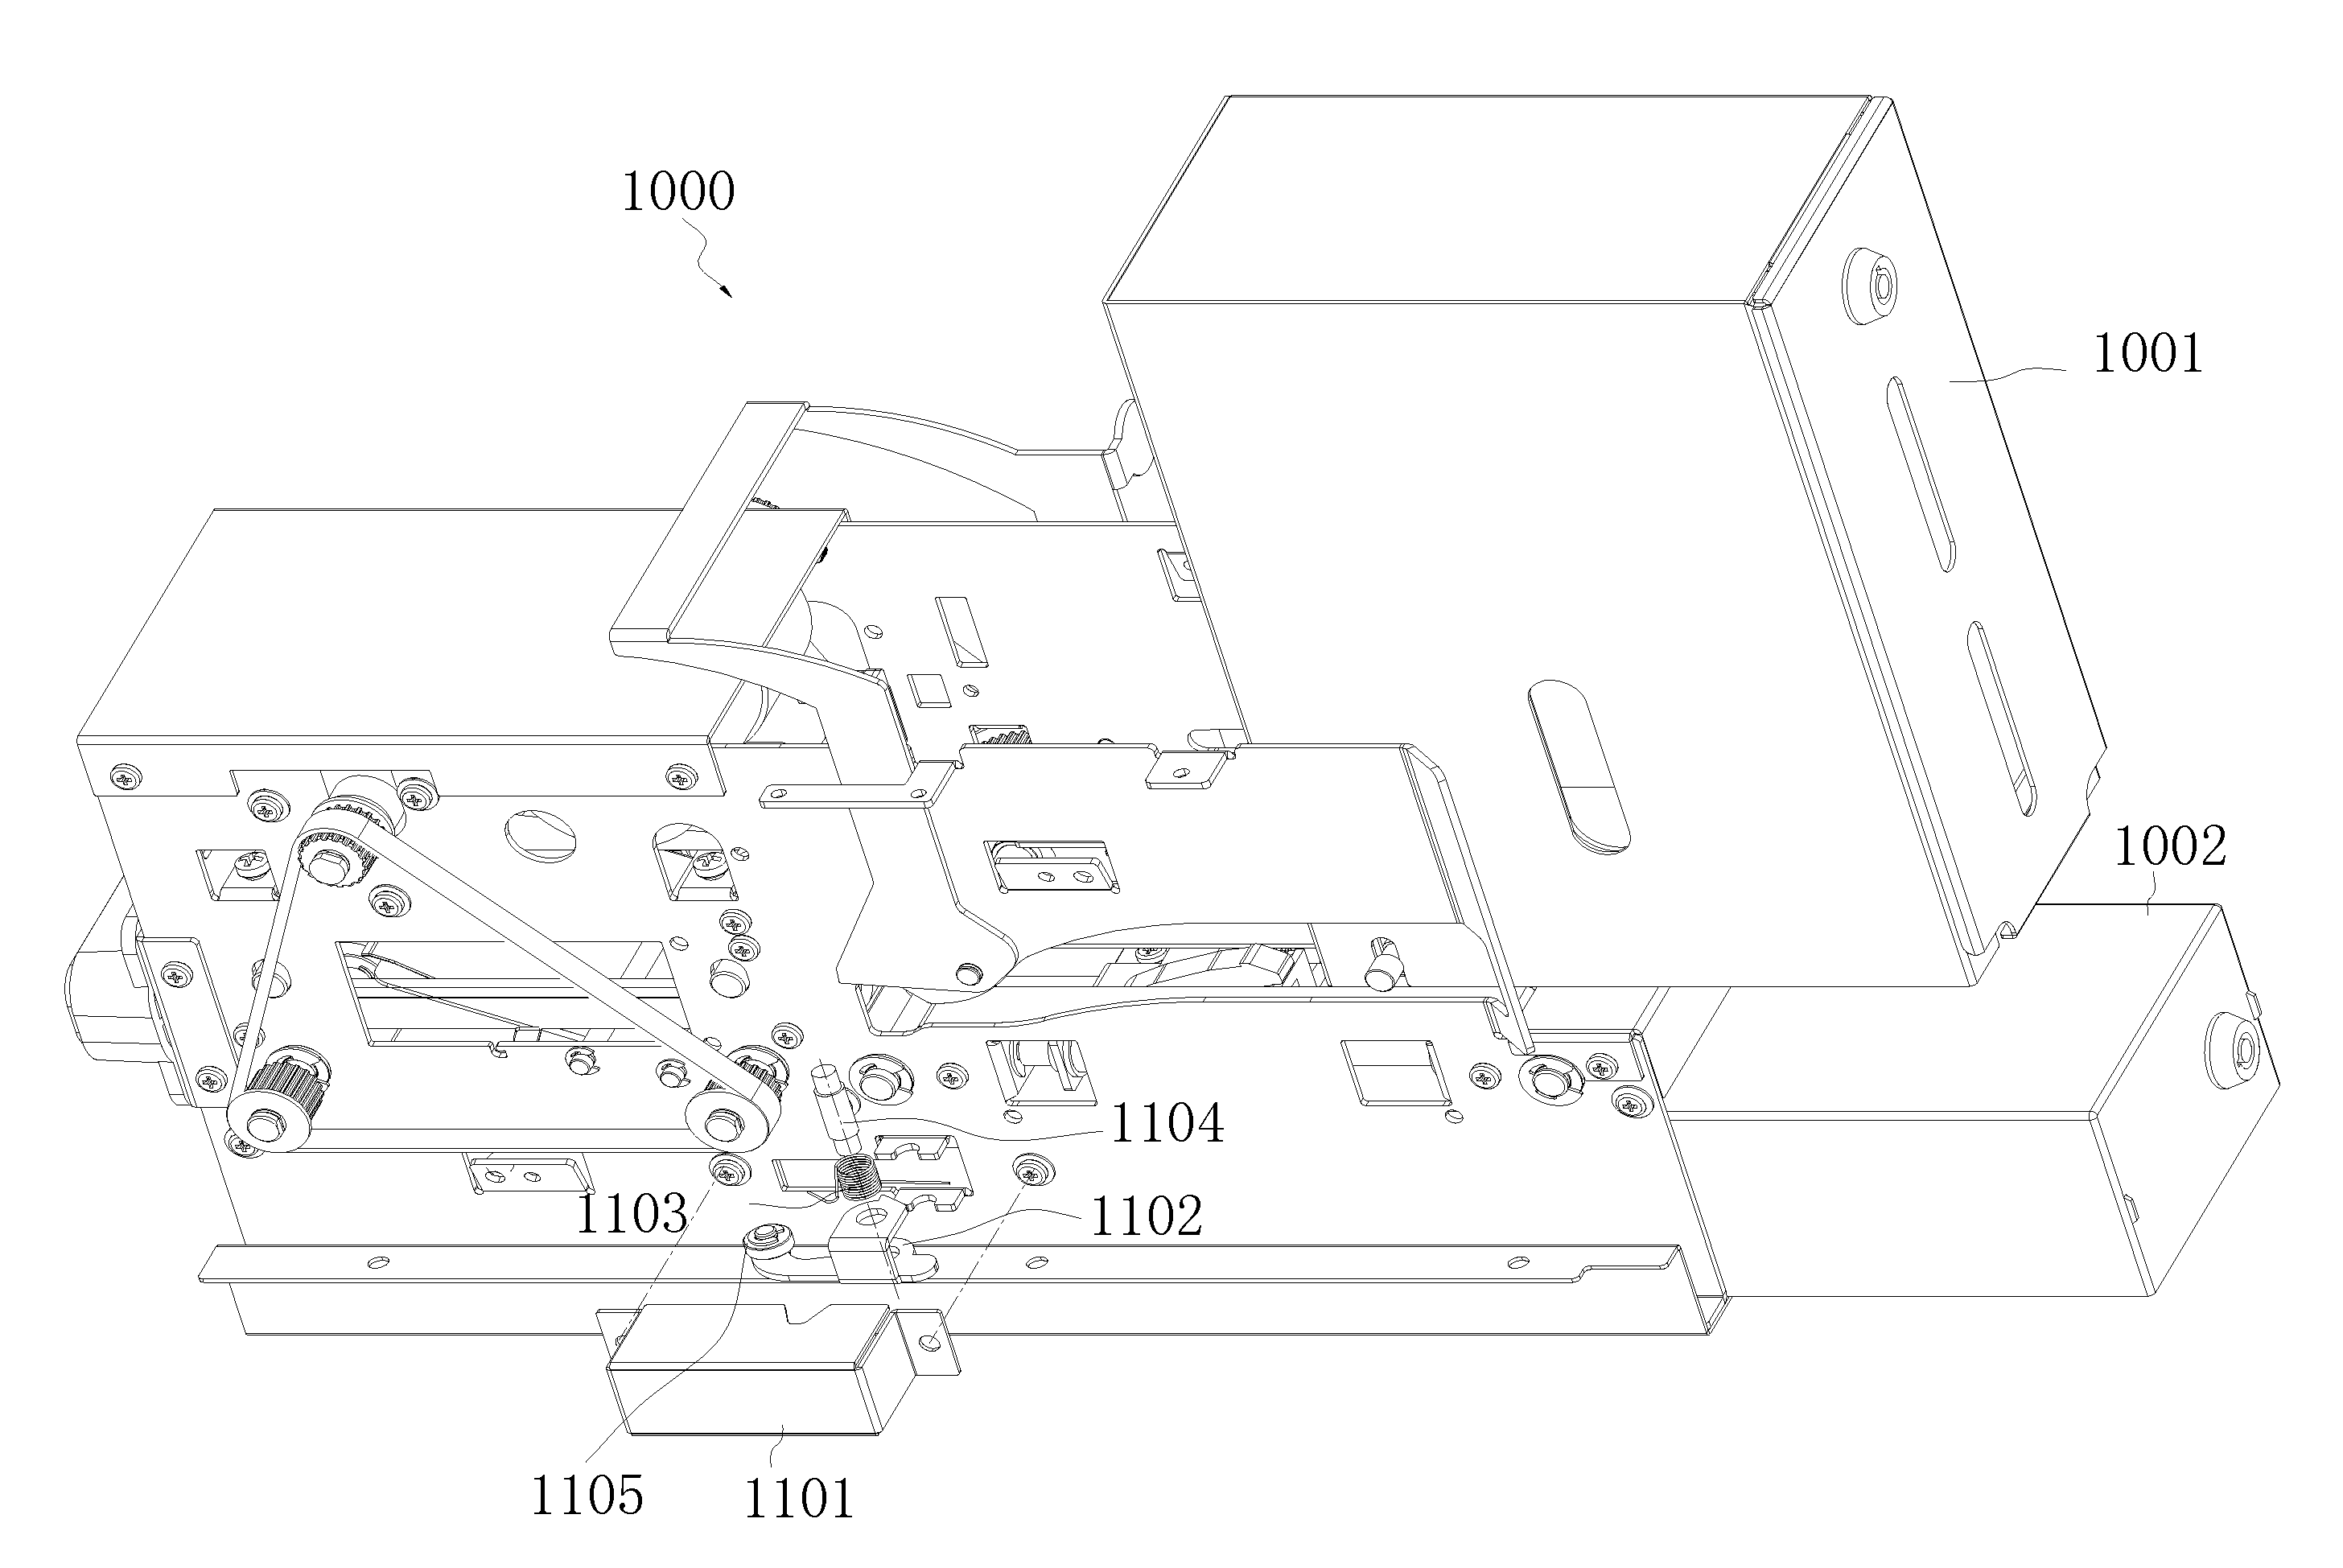 Apparatus for receiving and dispensing cards automatically